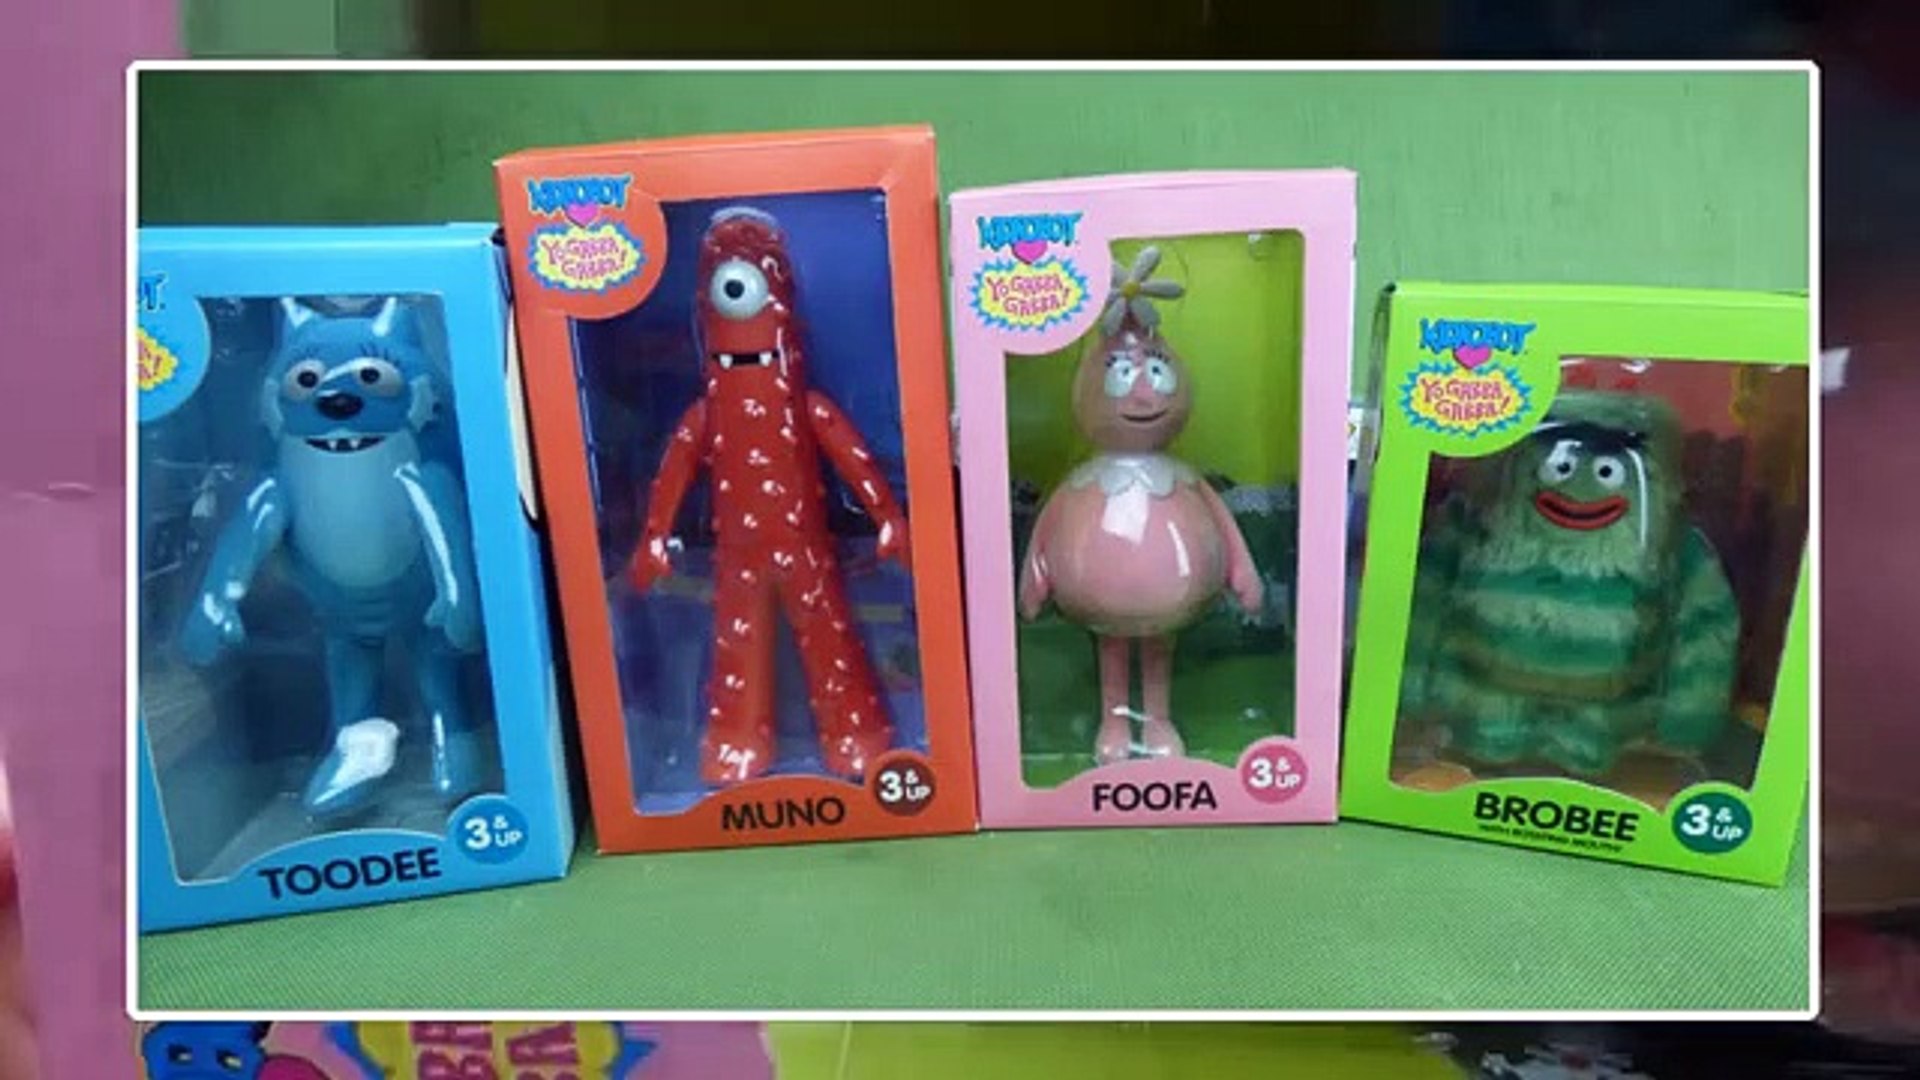 Yo Gabba Gabba Funko Pop Collector Toys Unboxing PLUS Plex the Robot  Flashlight from Spin Master- - video Dailymotion